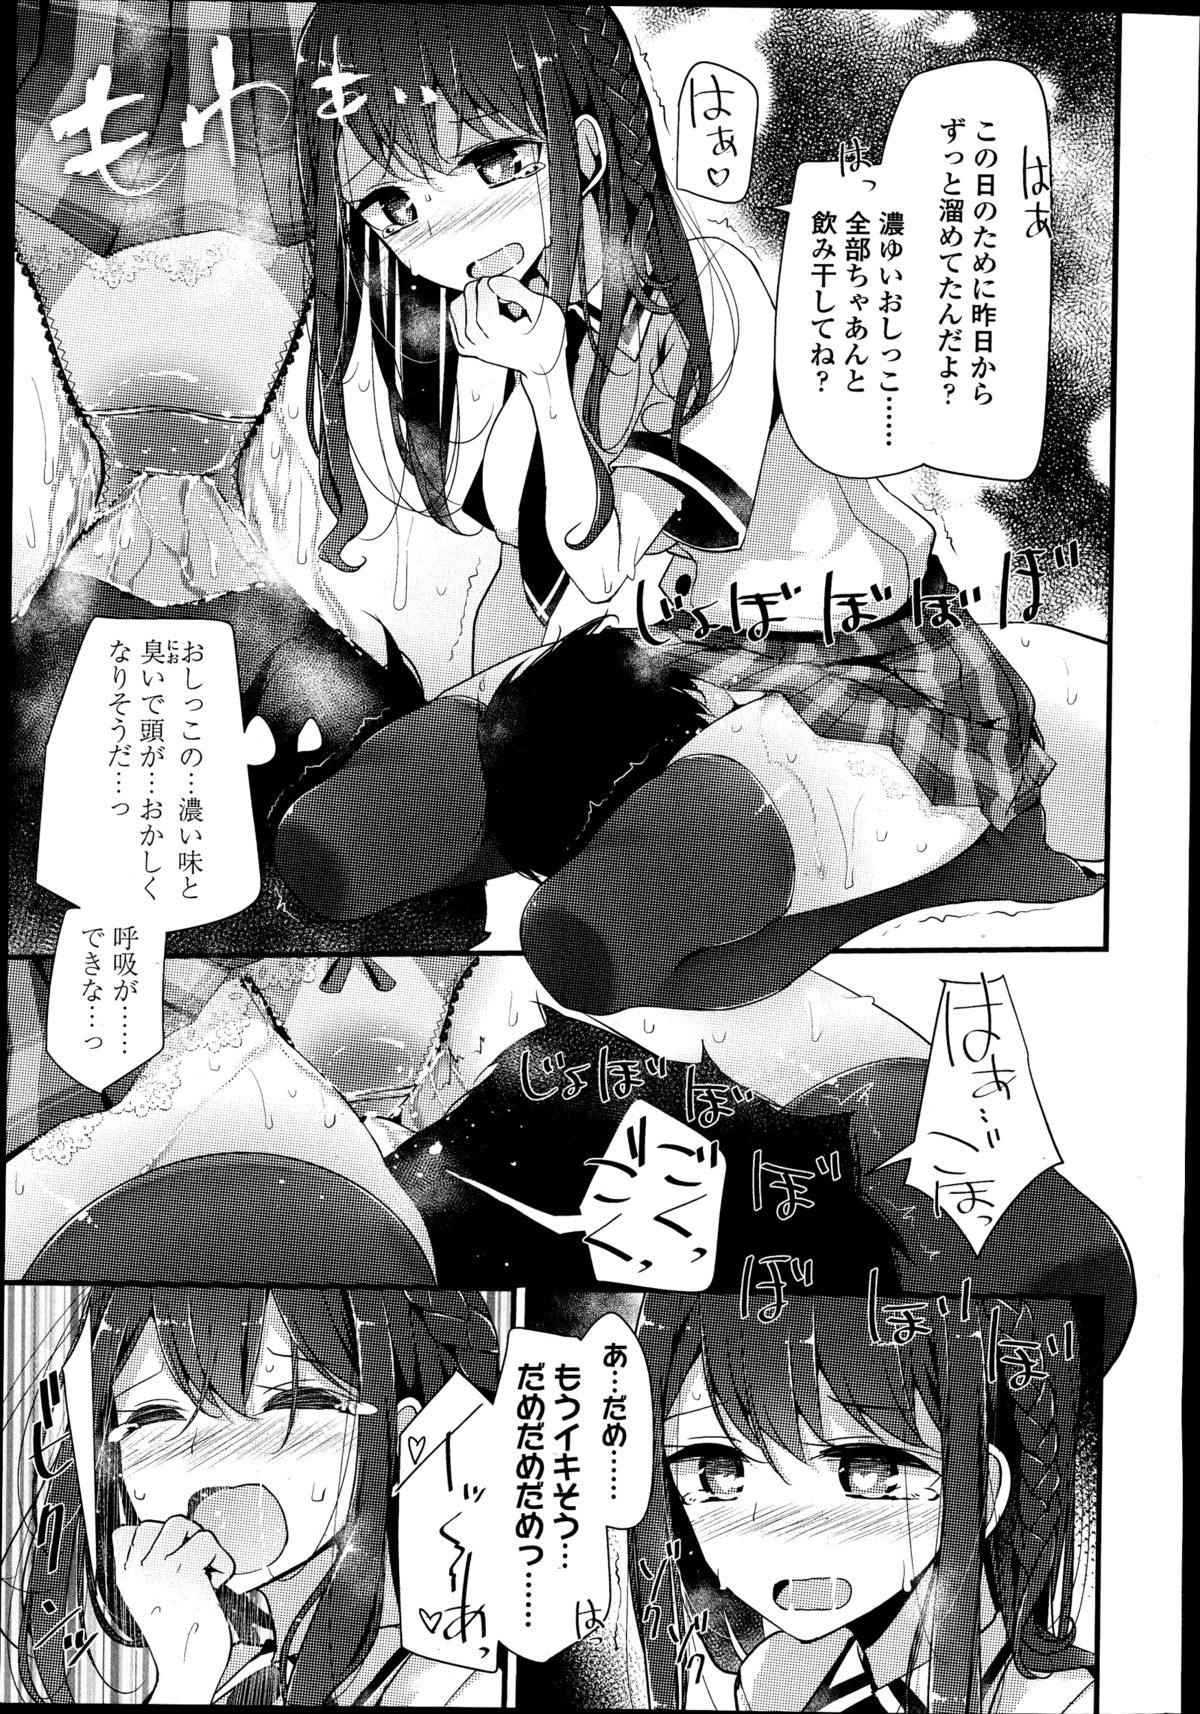 Girls forM Vol. 08 page 31 full